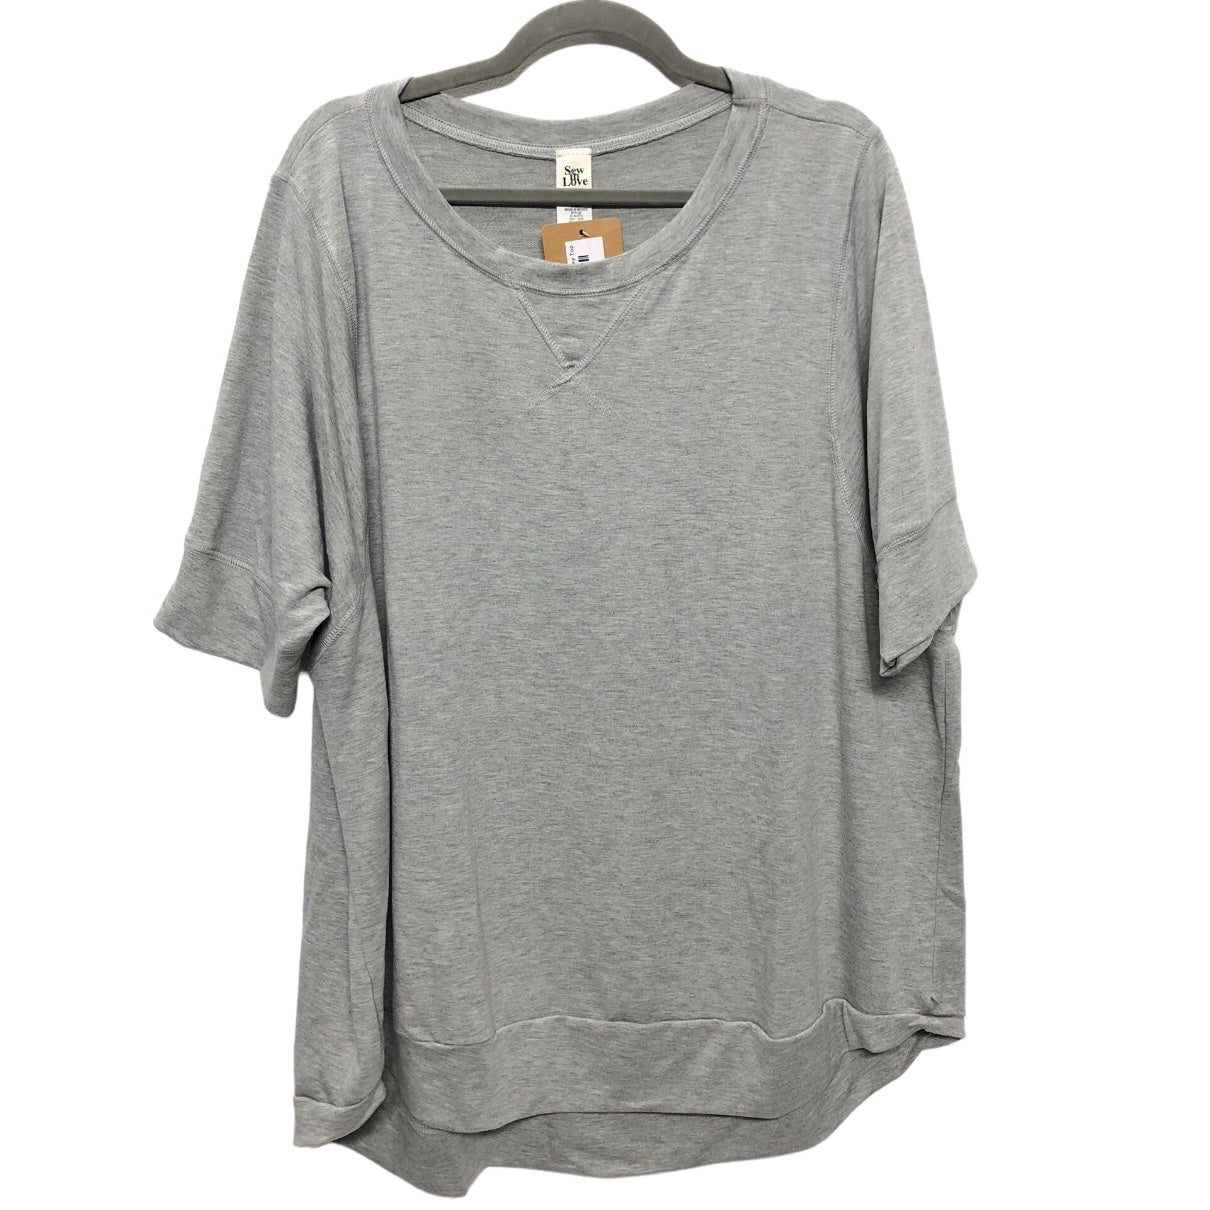 Grey Top Short Sleeve Basic Sew In Love, Size 3x